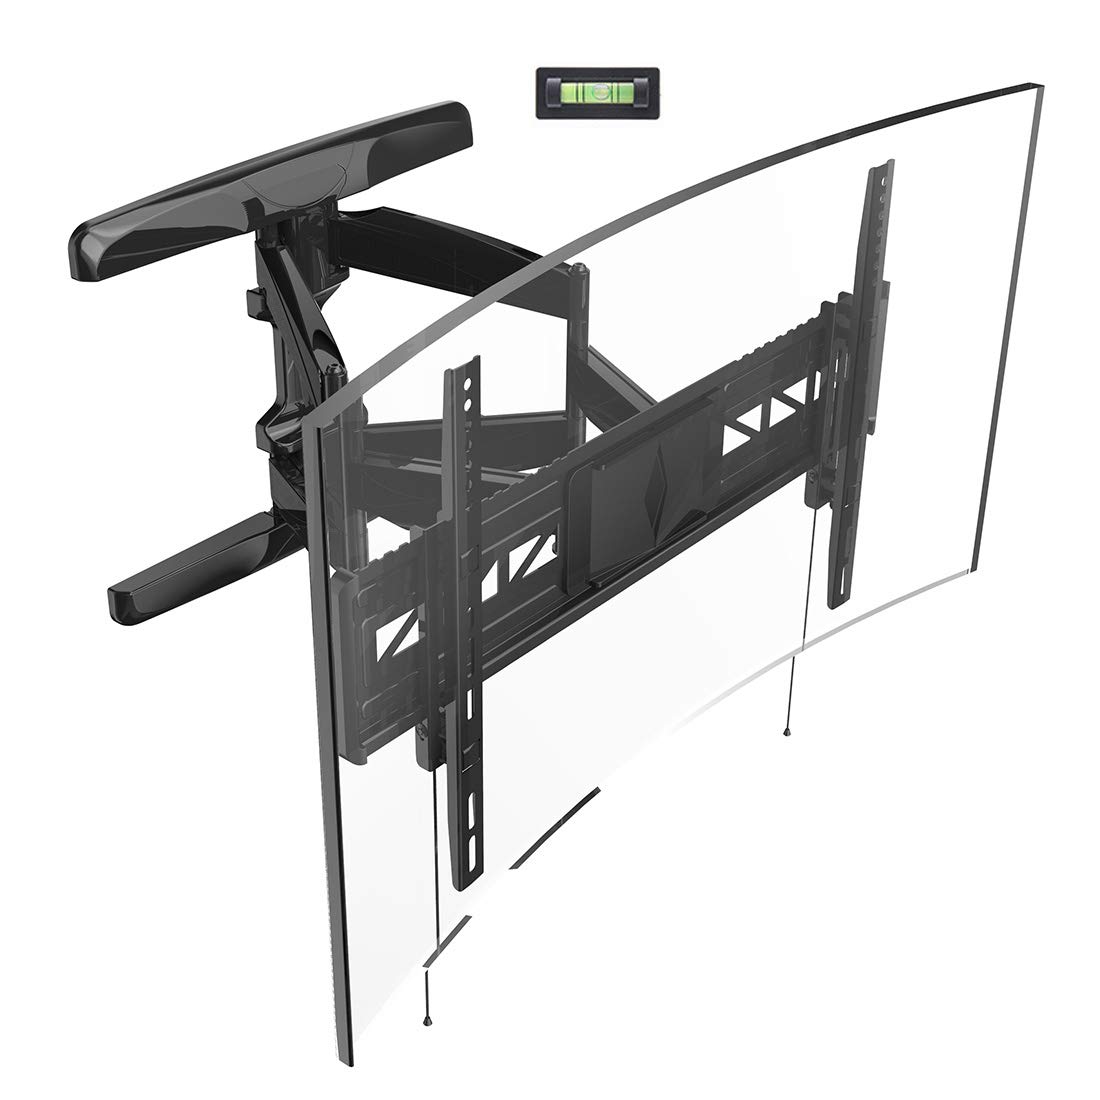 Is it possible to find a 65 inch curved wall mount? Yes!